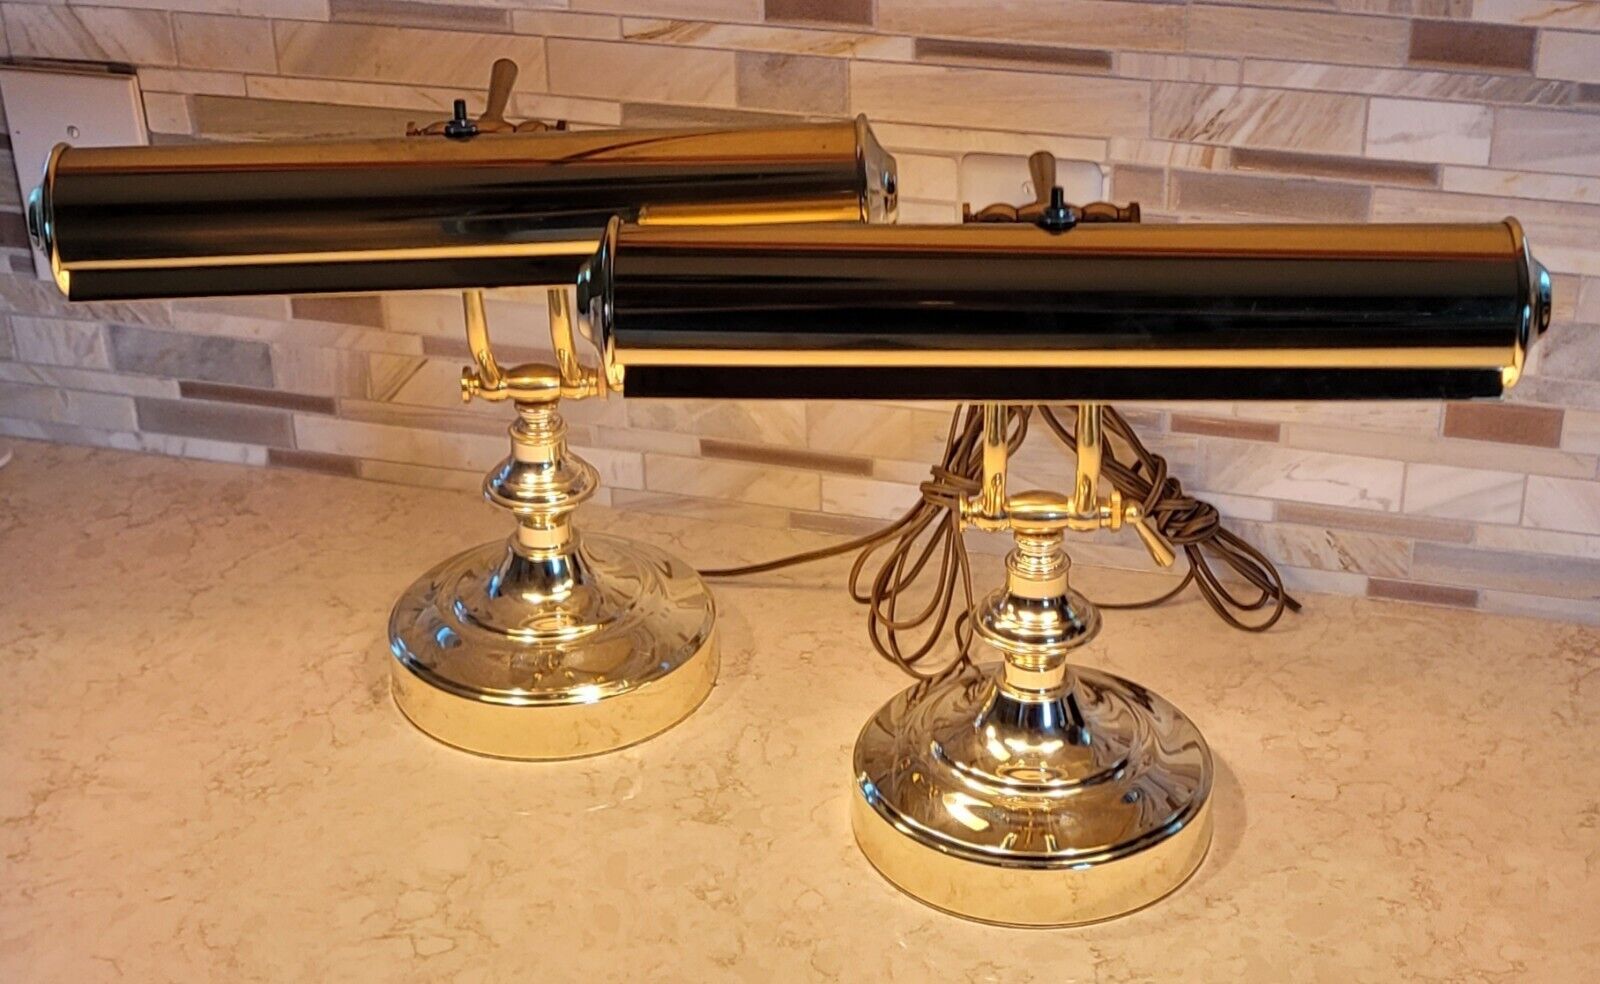 Pair of Vintage Brass Desk/Piano Reading Lamps Both in Excellent Condition NICE